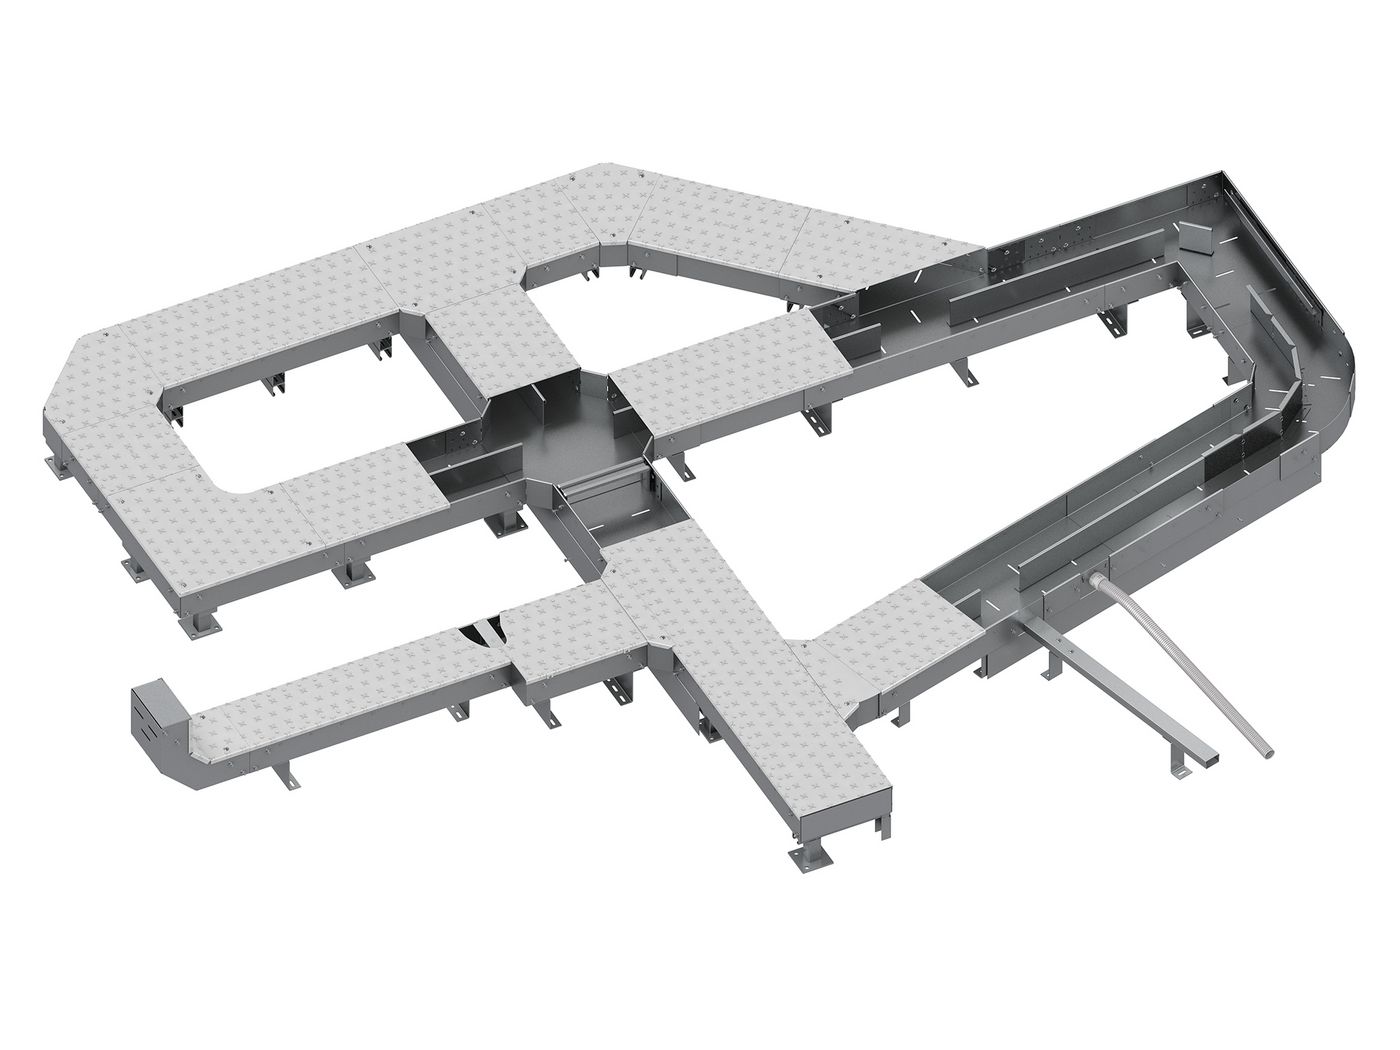 PohlCon Floor ducts system overview